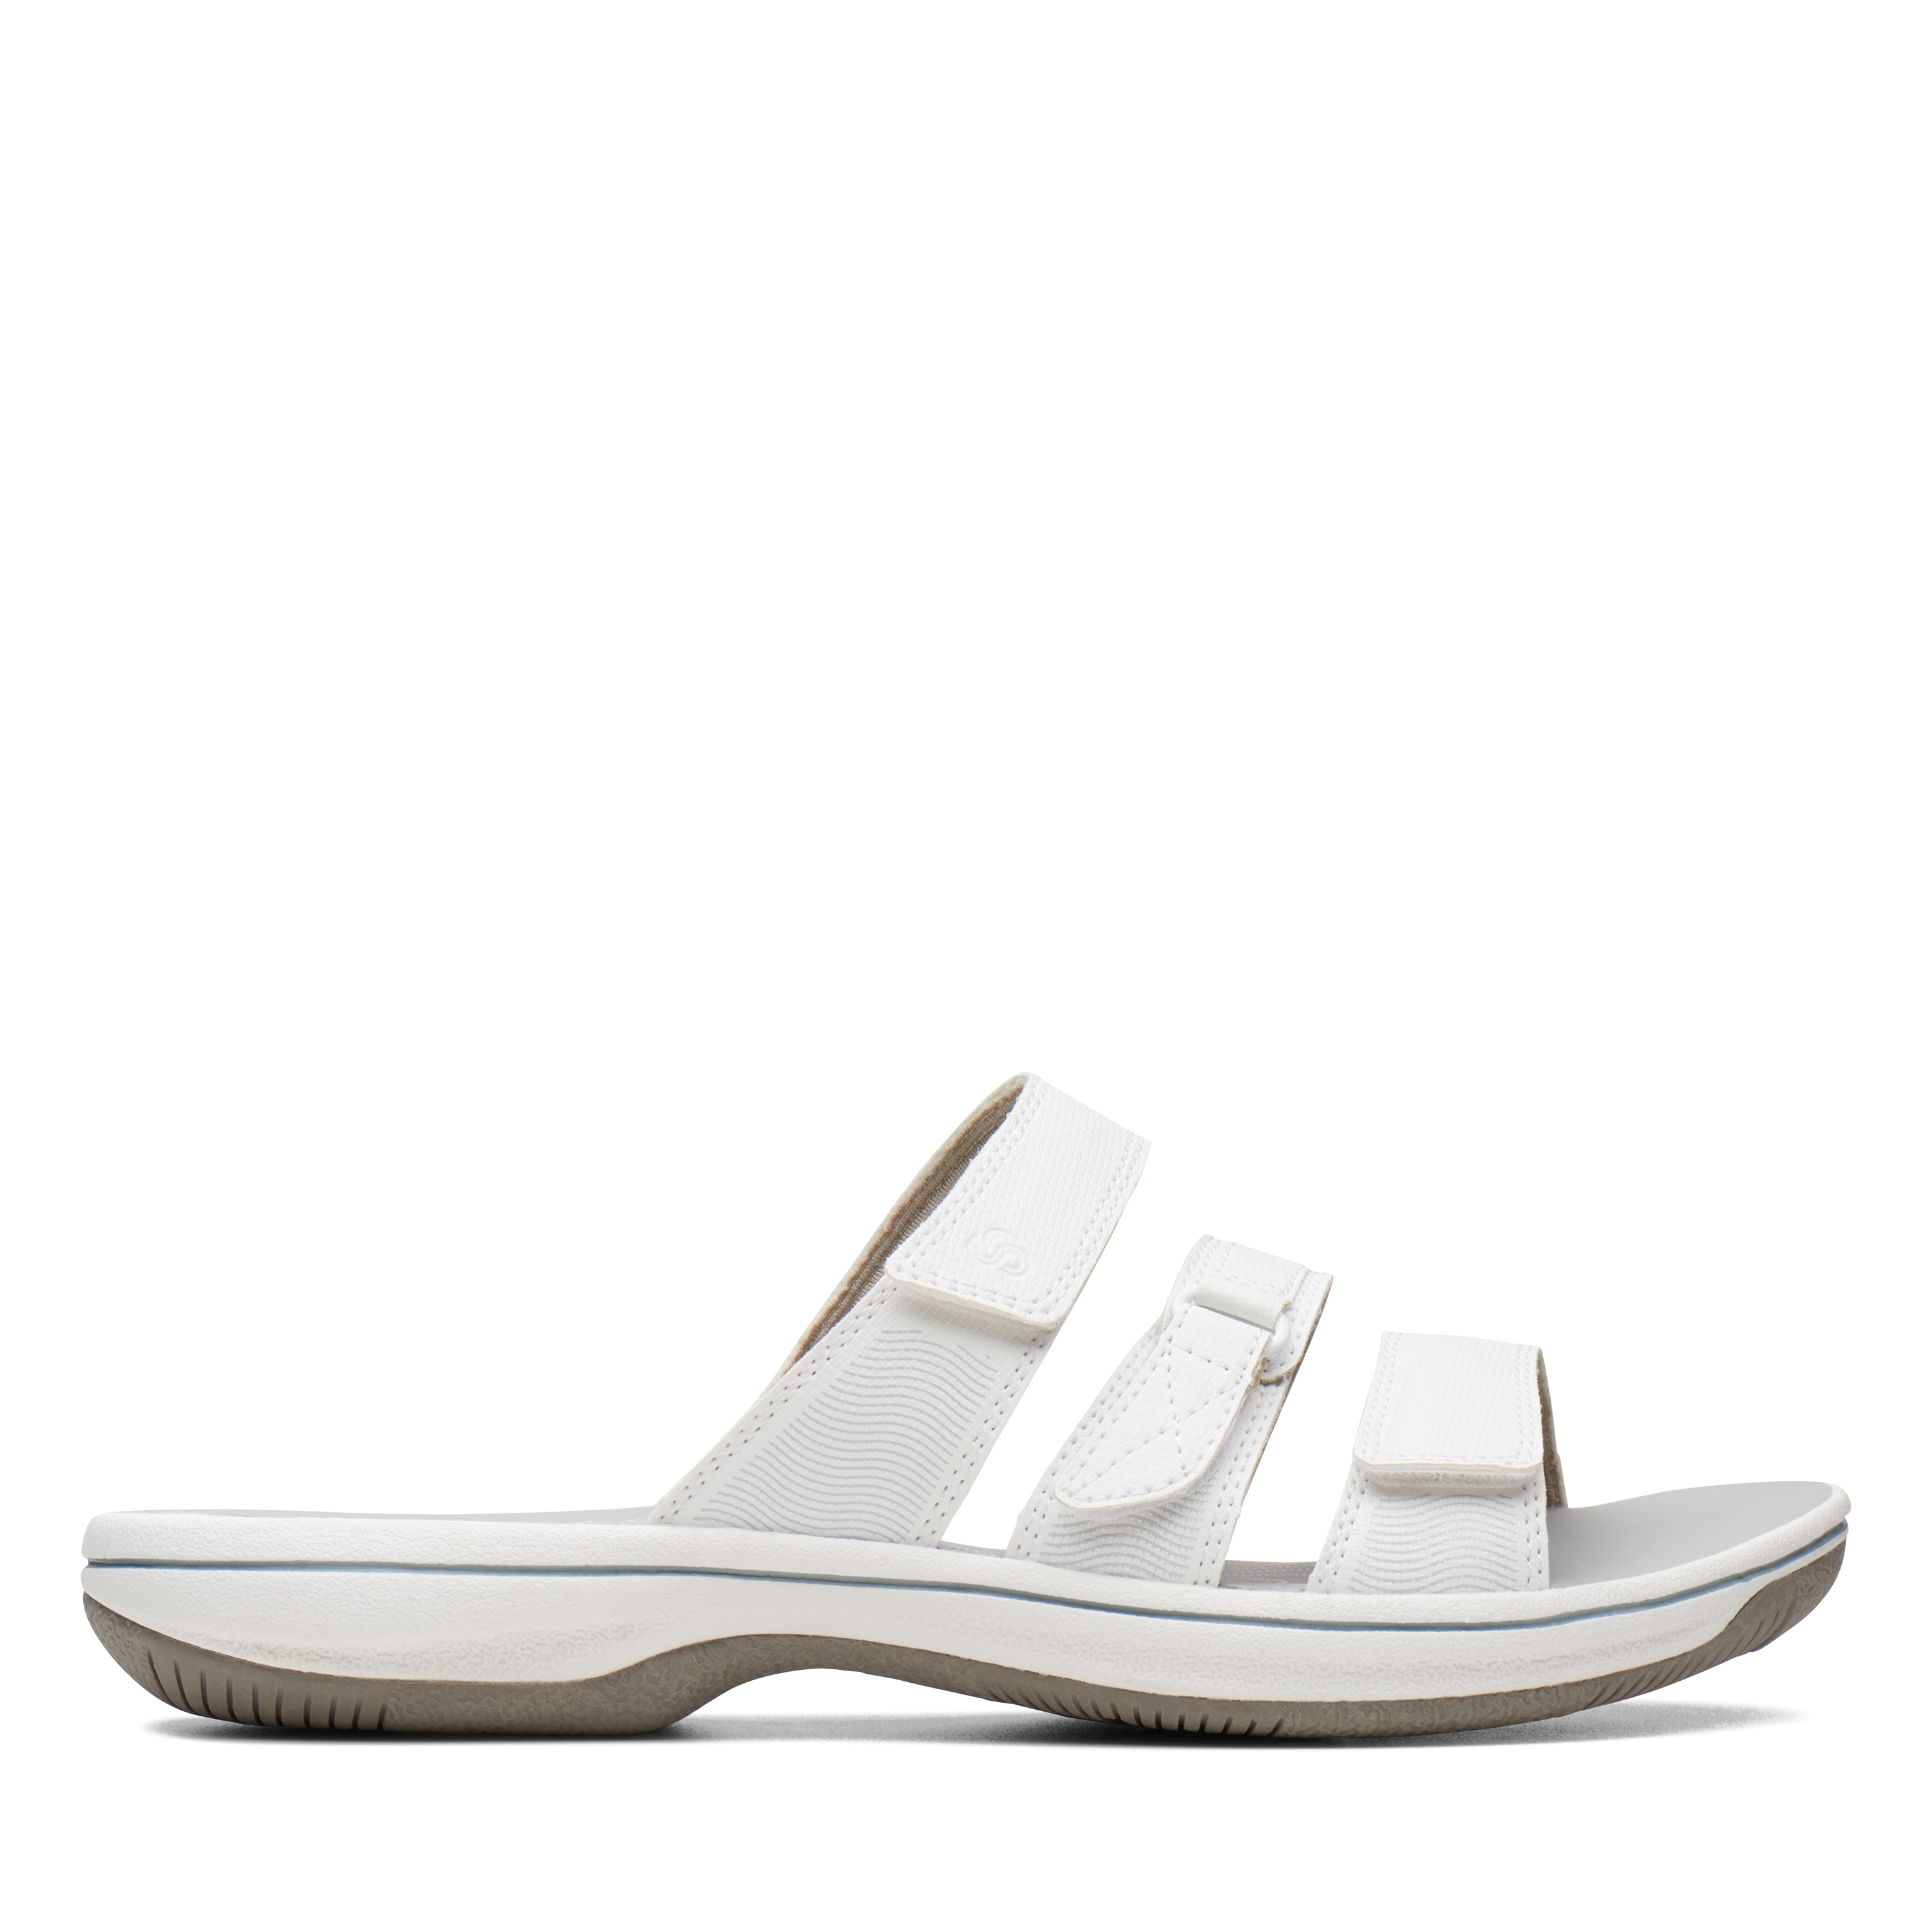 Clarks | Brinkley Coast White Synthetic Flat Sandals